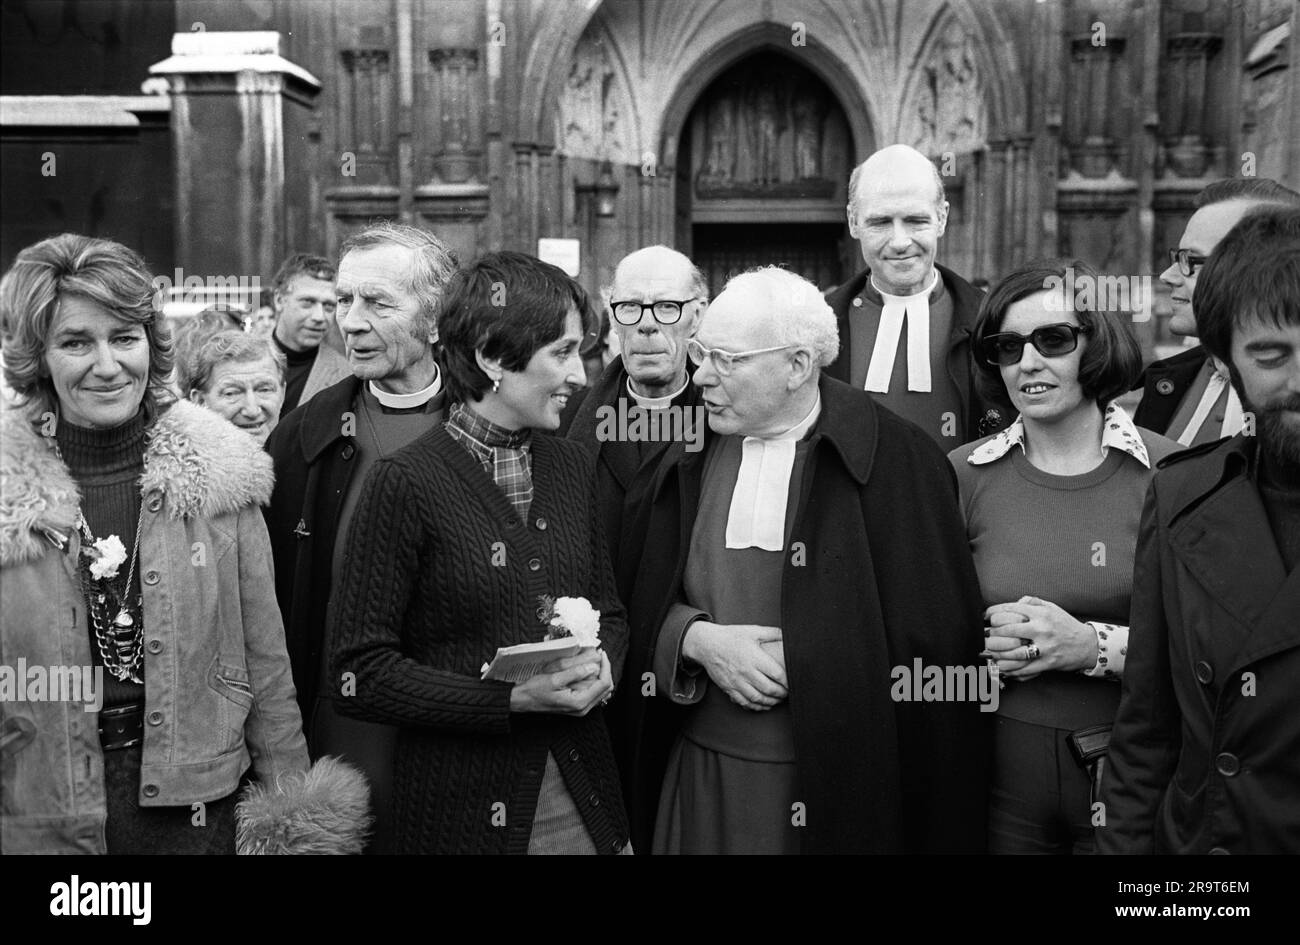 The Peace People outside Westminster Abbey London. Mrs Jane Ewart Biggs,(L) Joan Baez,(C) American folk singer meets with the Archbishop, Betty Williams (R) . The Peace Movement was founded to try to bring about peace in Northern Ireland. London, England 6th December 1976. UK 1979s HOMER SYKES Stock Photo